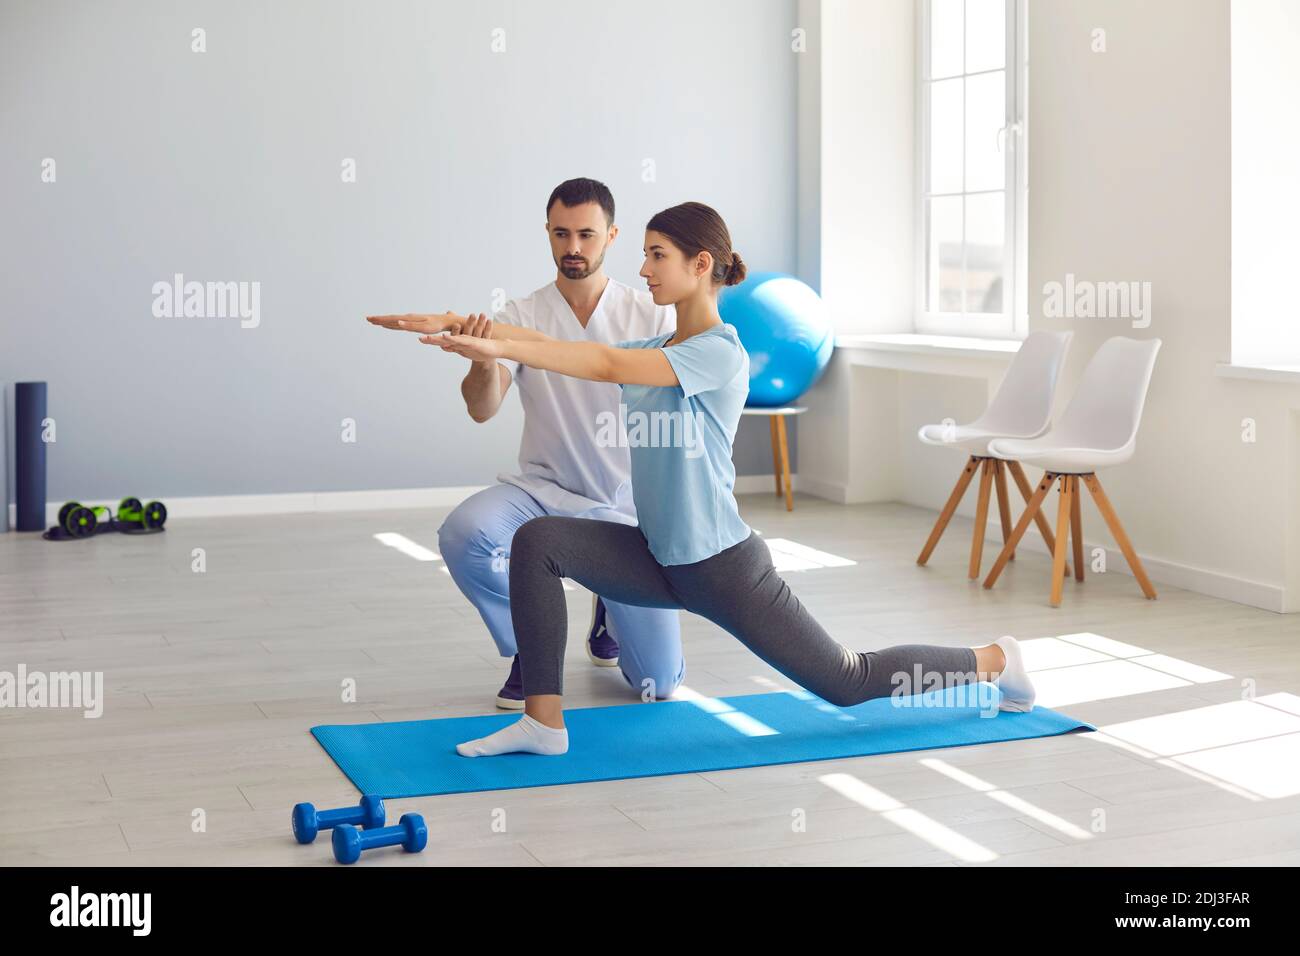 Man chiropractor fixing woman patients movements during exercising on fitness mat Stock Photo